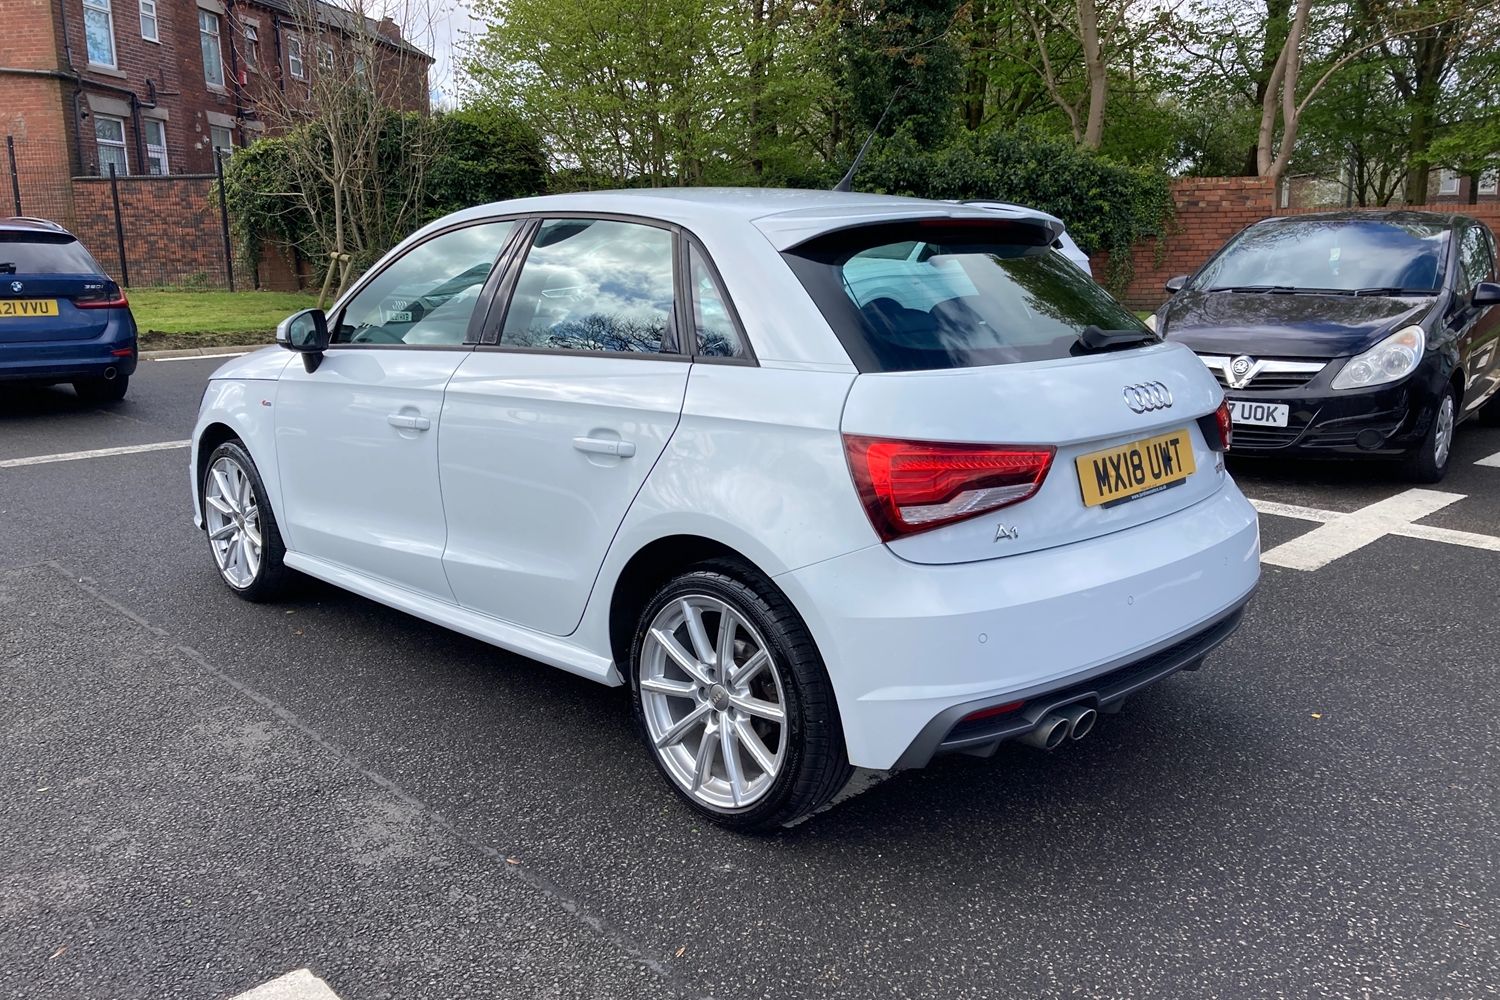 Audi A1 S line 1.4 TFSI 125 PS 6-speed